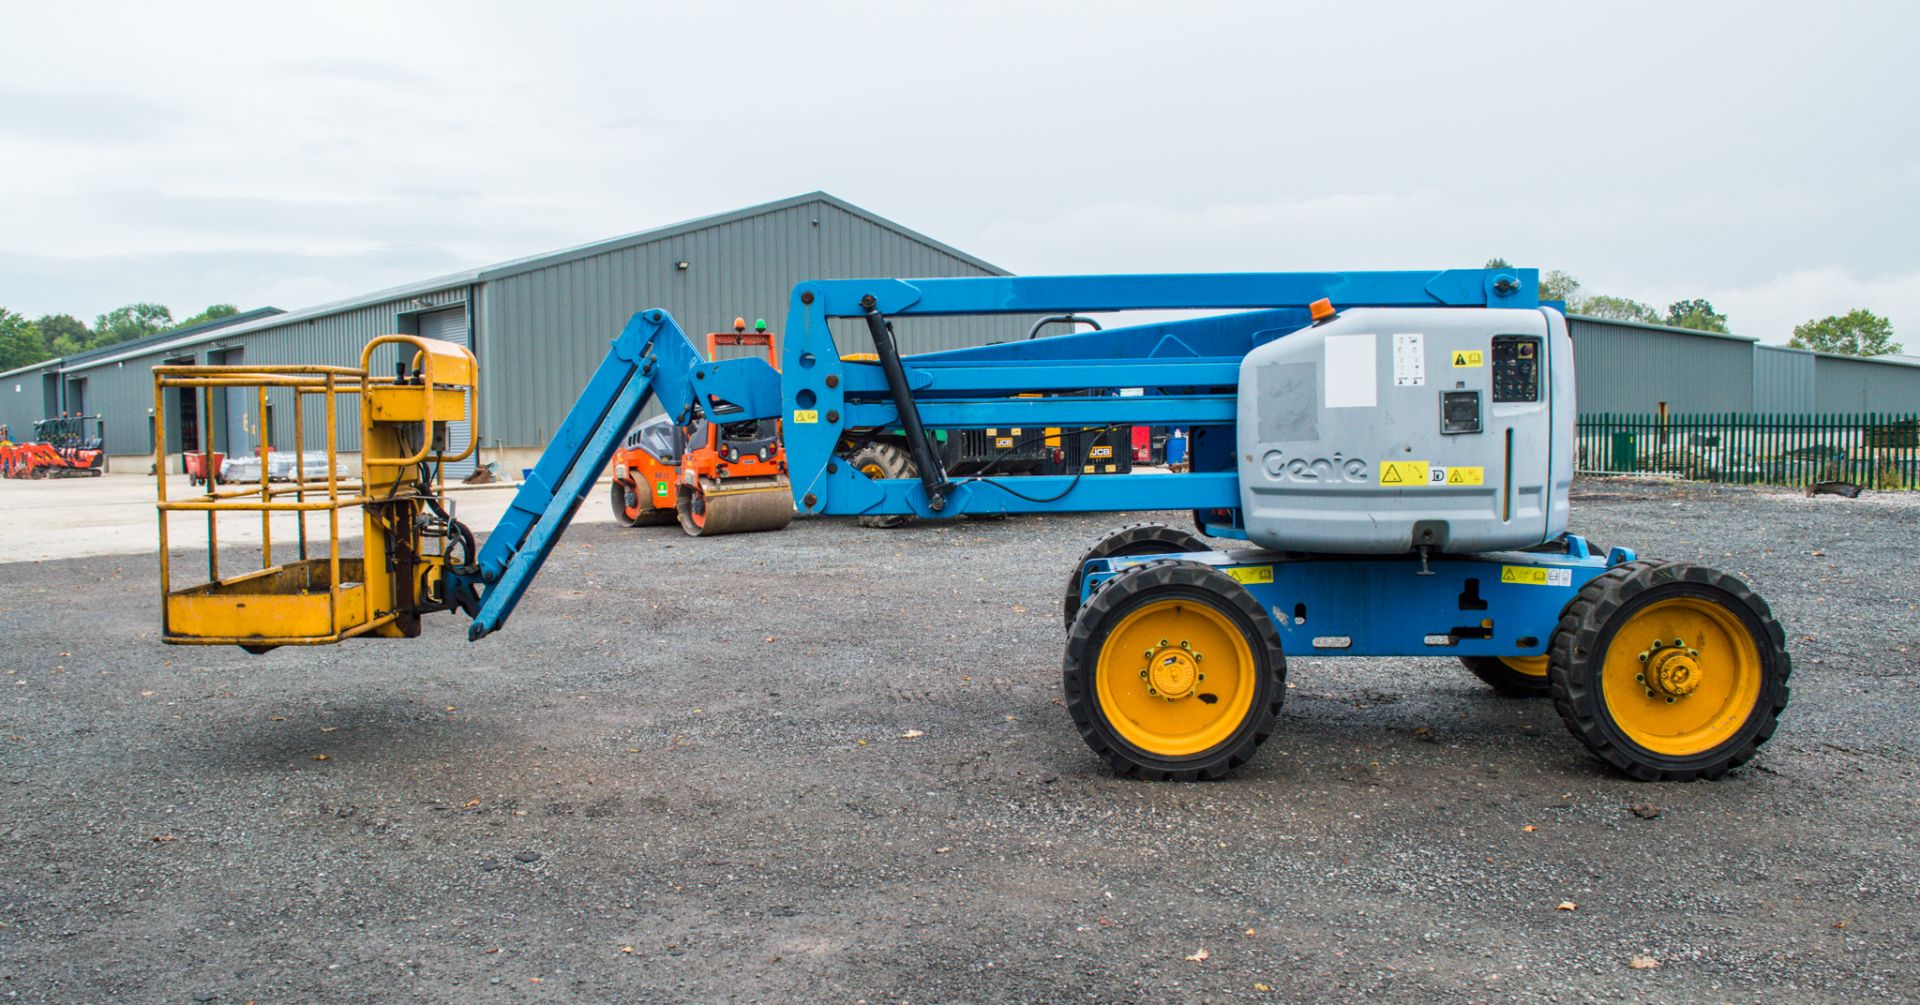 Genie Z-45/25 45 foot diesel driven 4WD articulated boom lift Year: 2011 S/N: 11B-1672 Recorded - Image 5 of 15